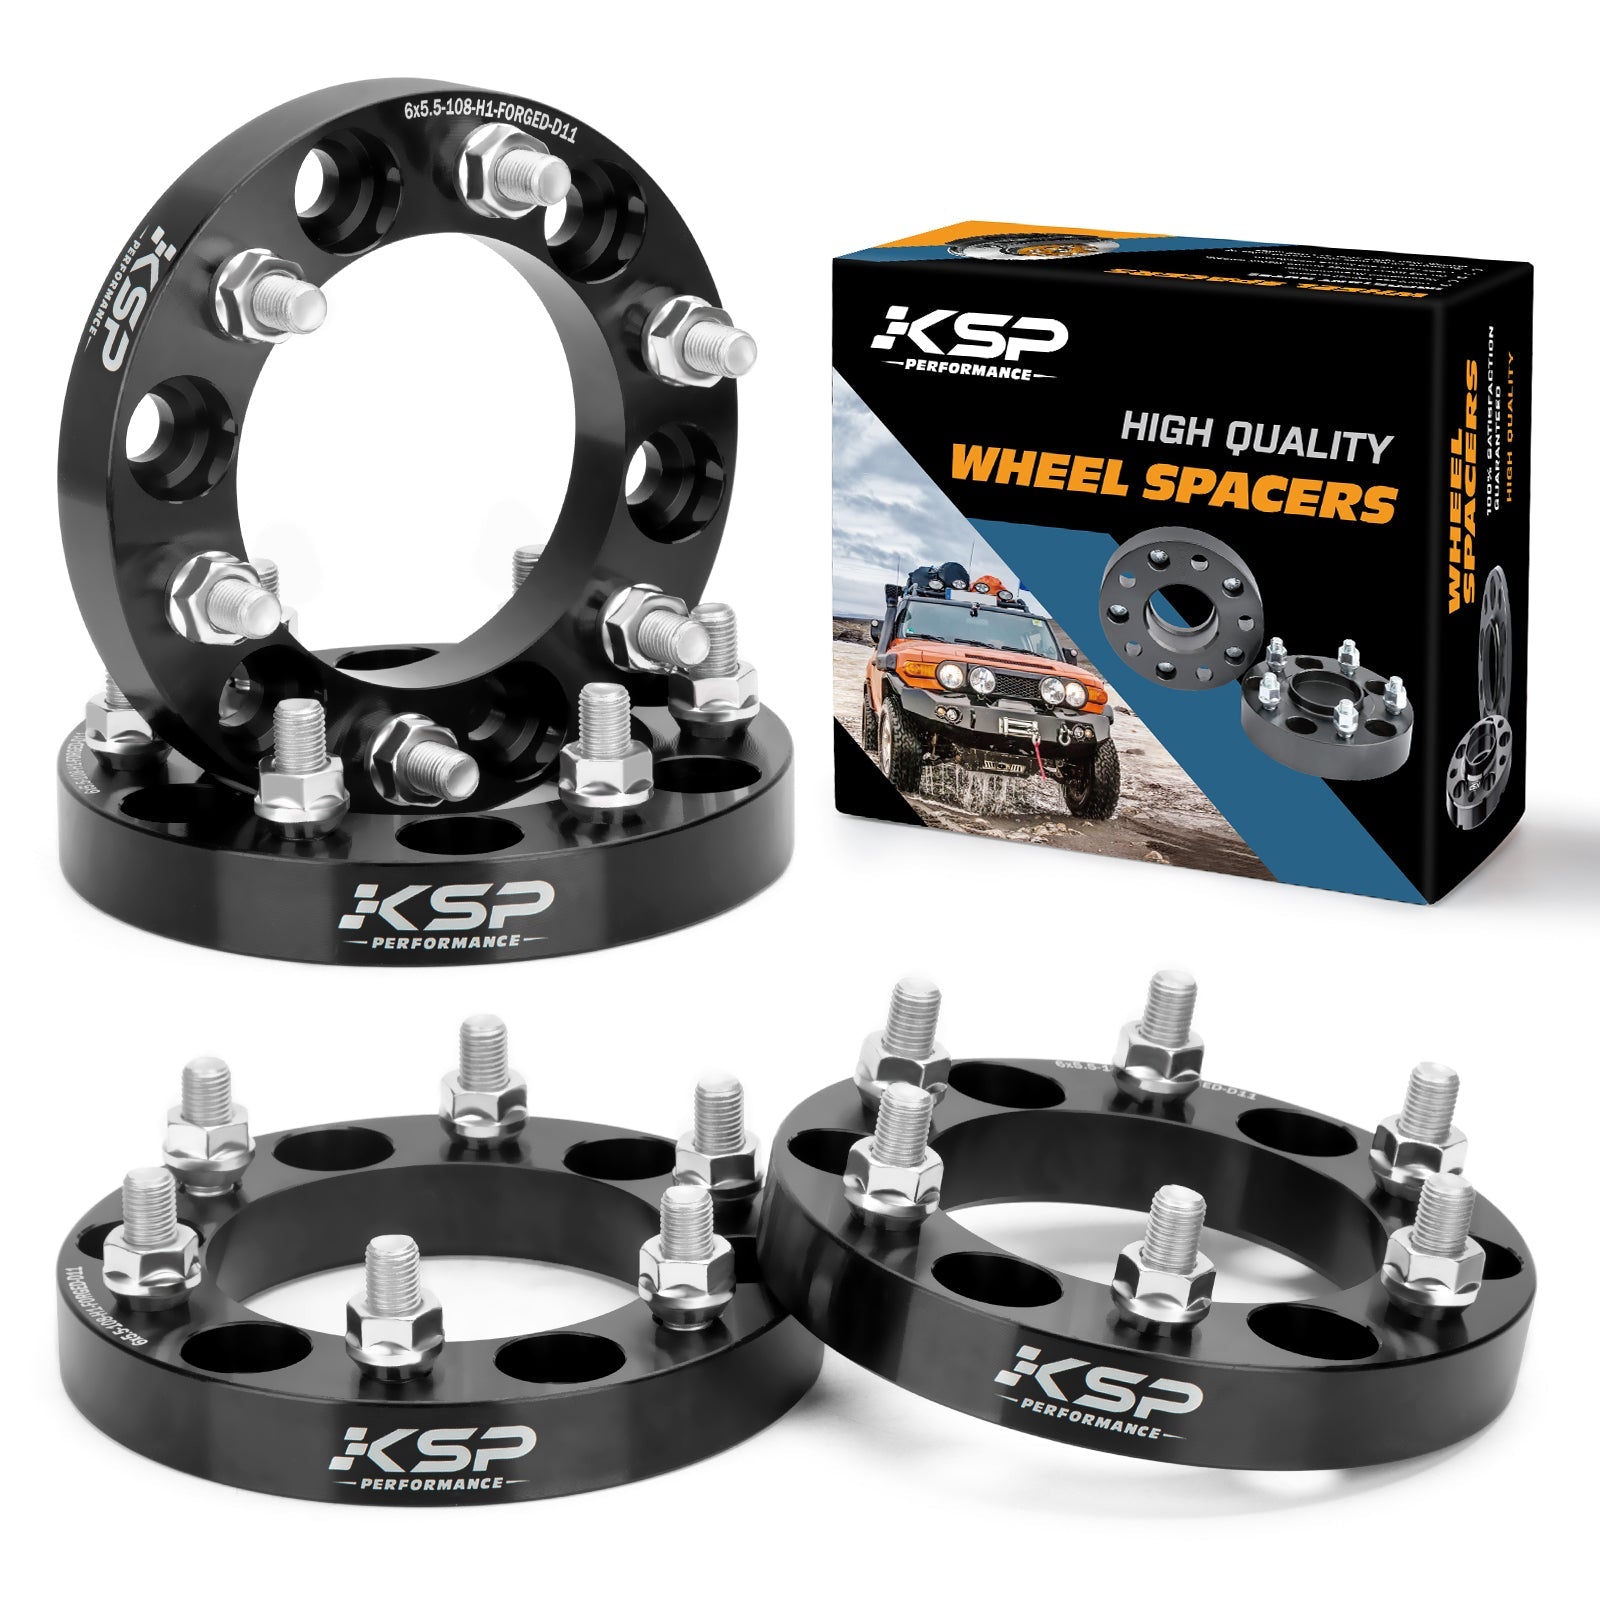 Wheel Spacers 1 Inch 6x5.5" For Toyota Tacoma 4Runner Tundra Kia xccscss.